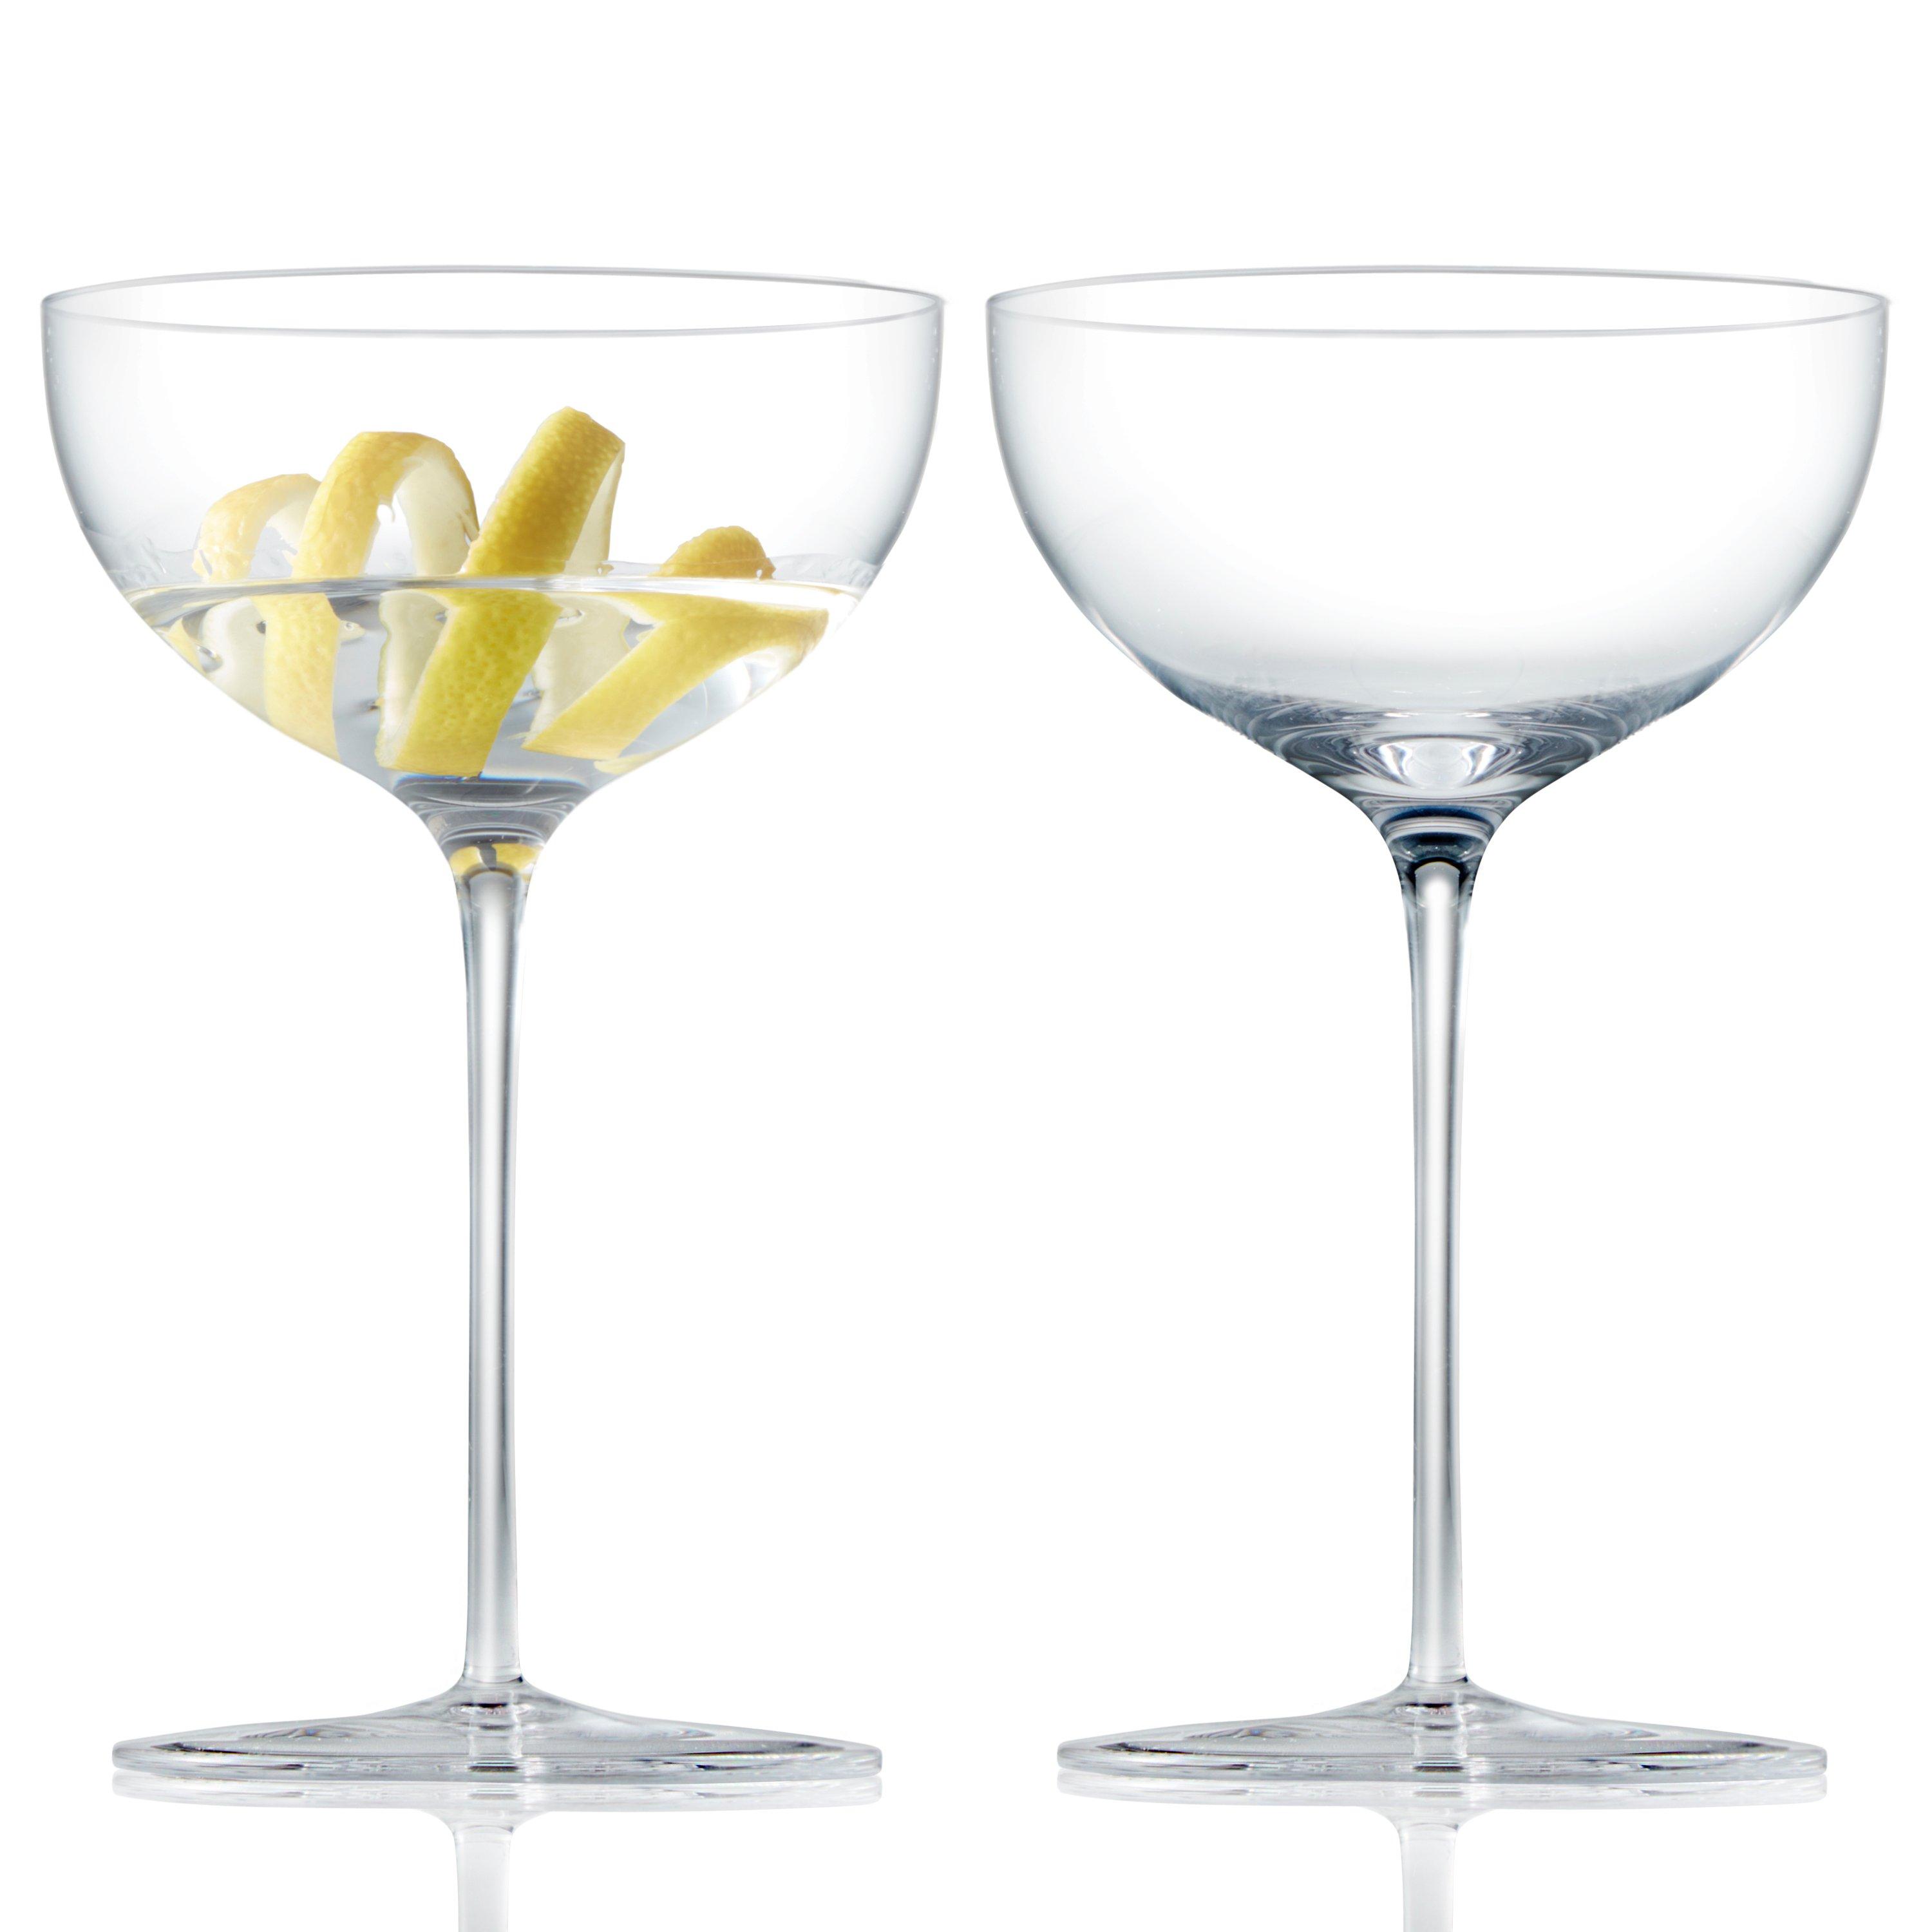 Cocktail & Champagne Coupe Glasses Coupe Cocktail Glasses 7 oz